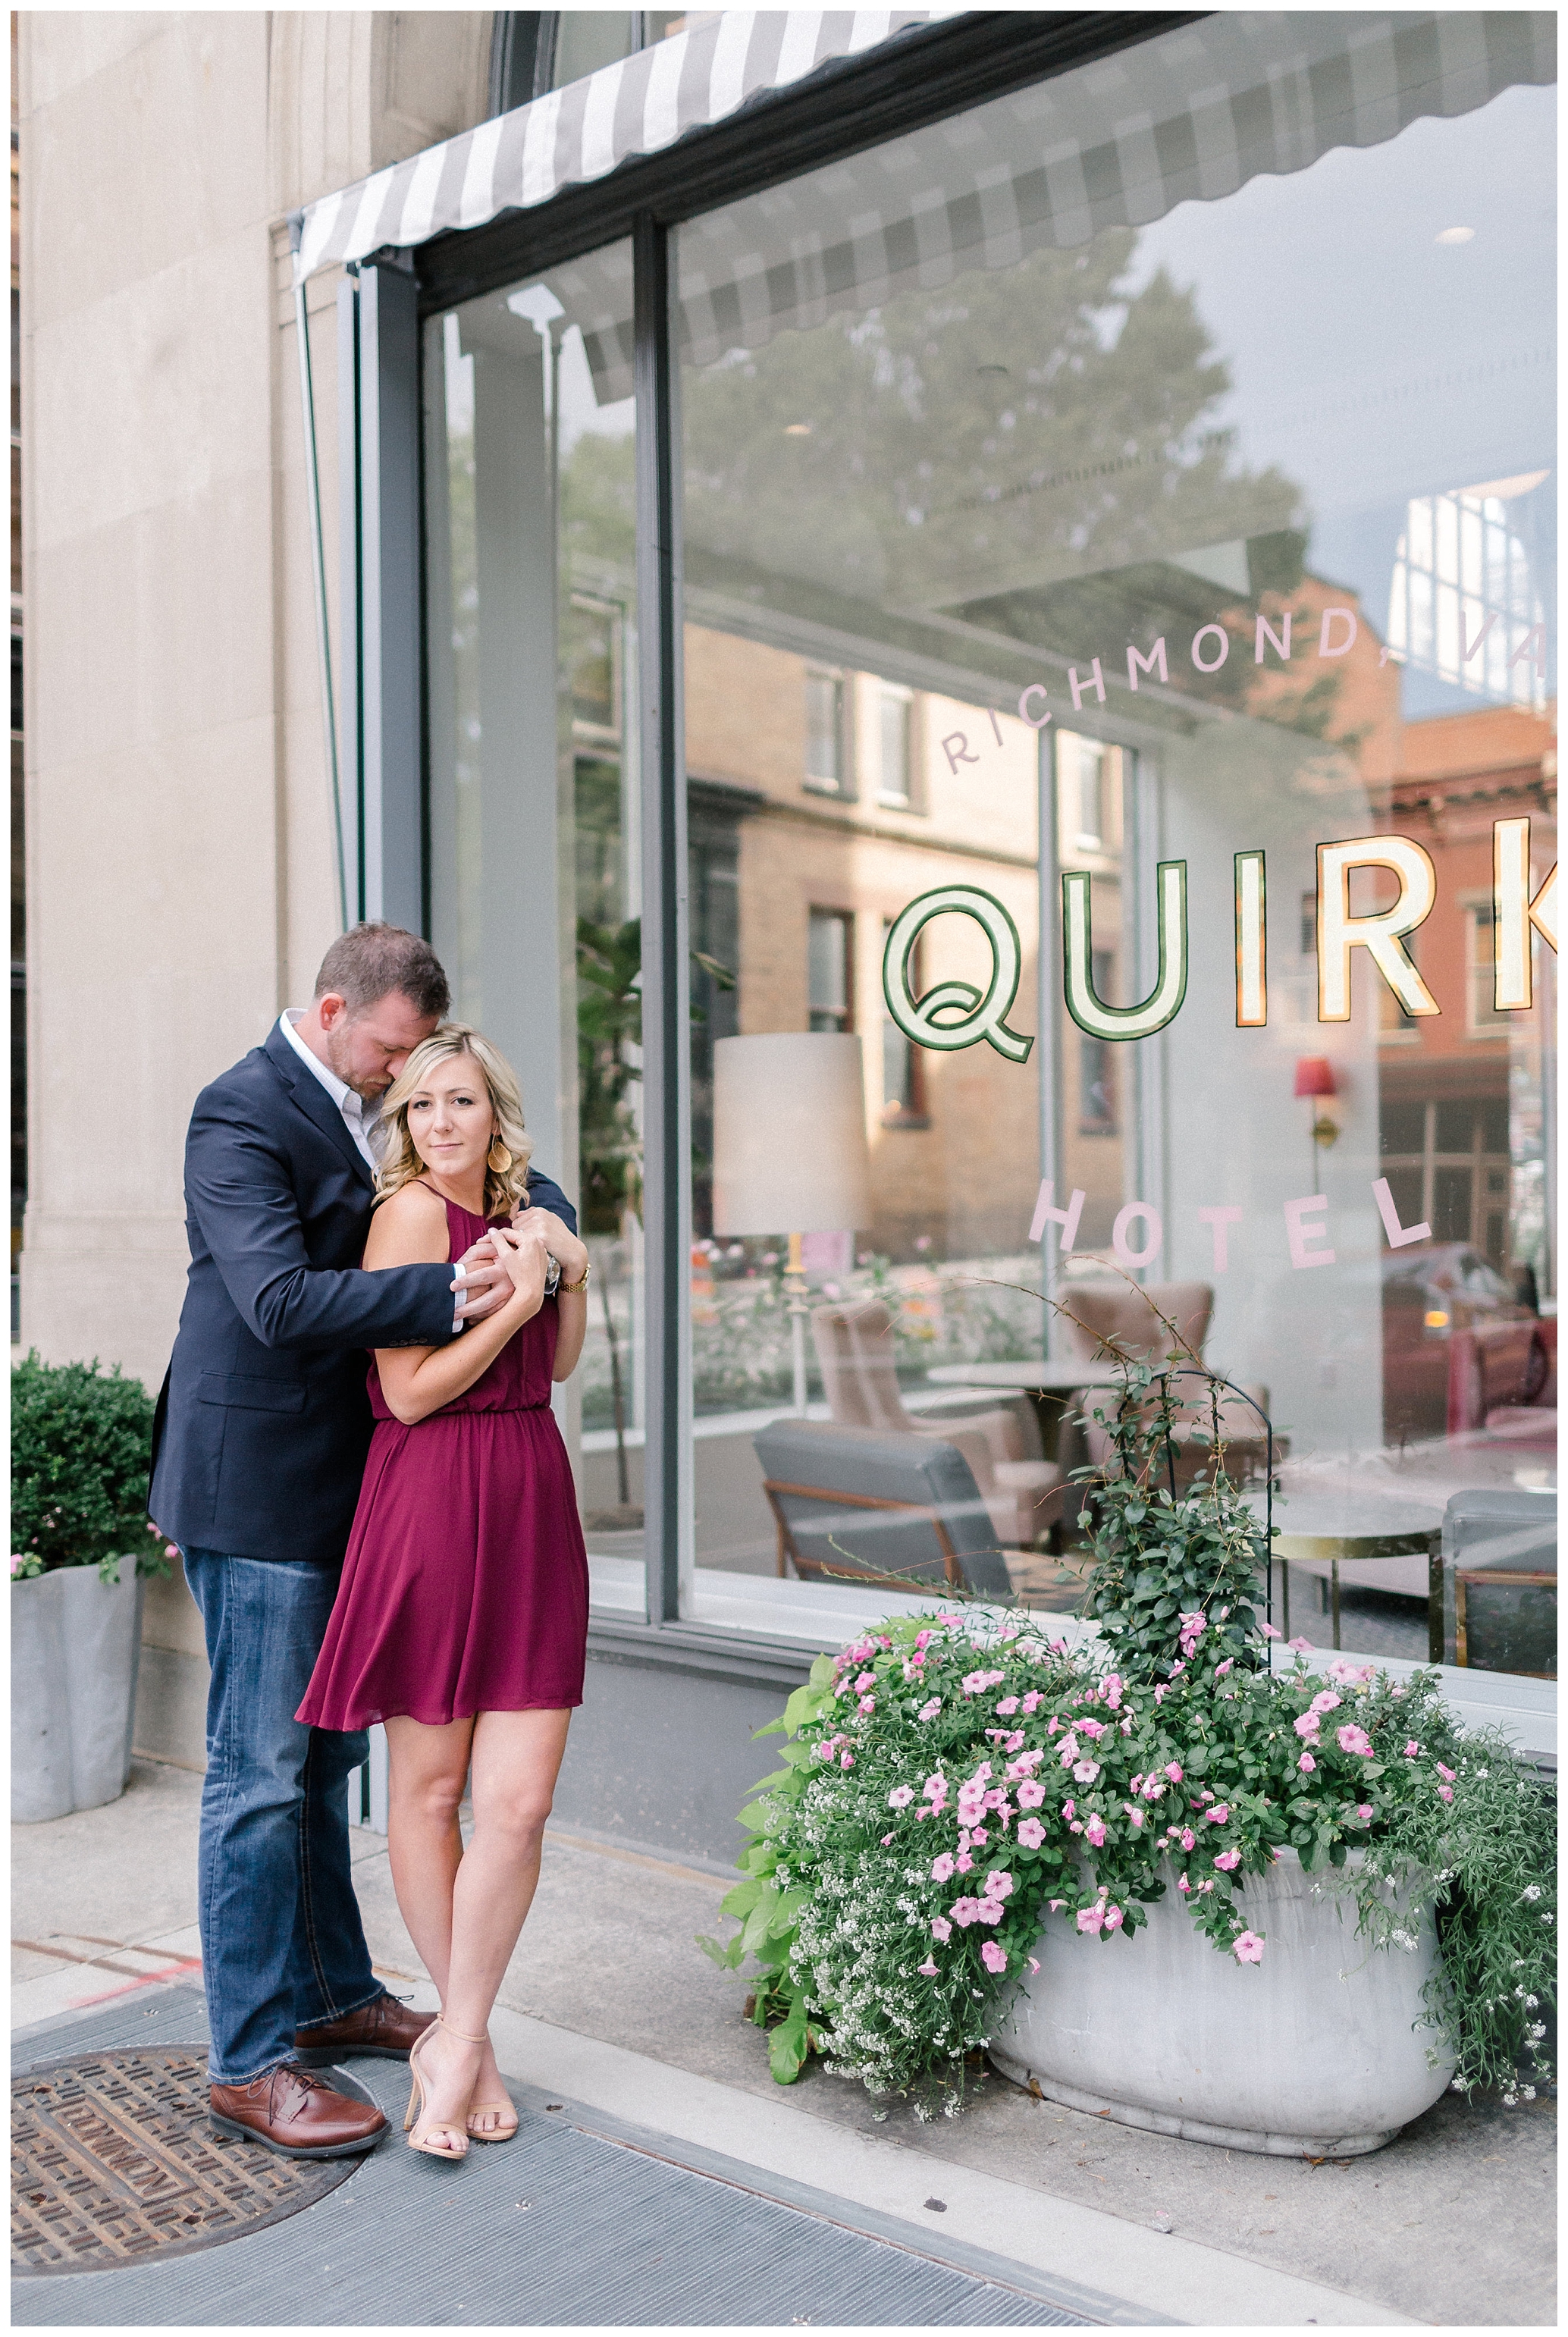 Quirk Hotel Engagement Session